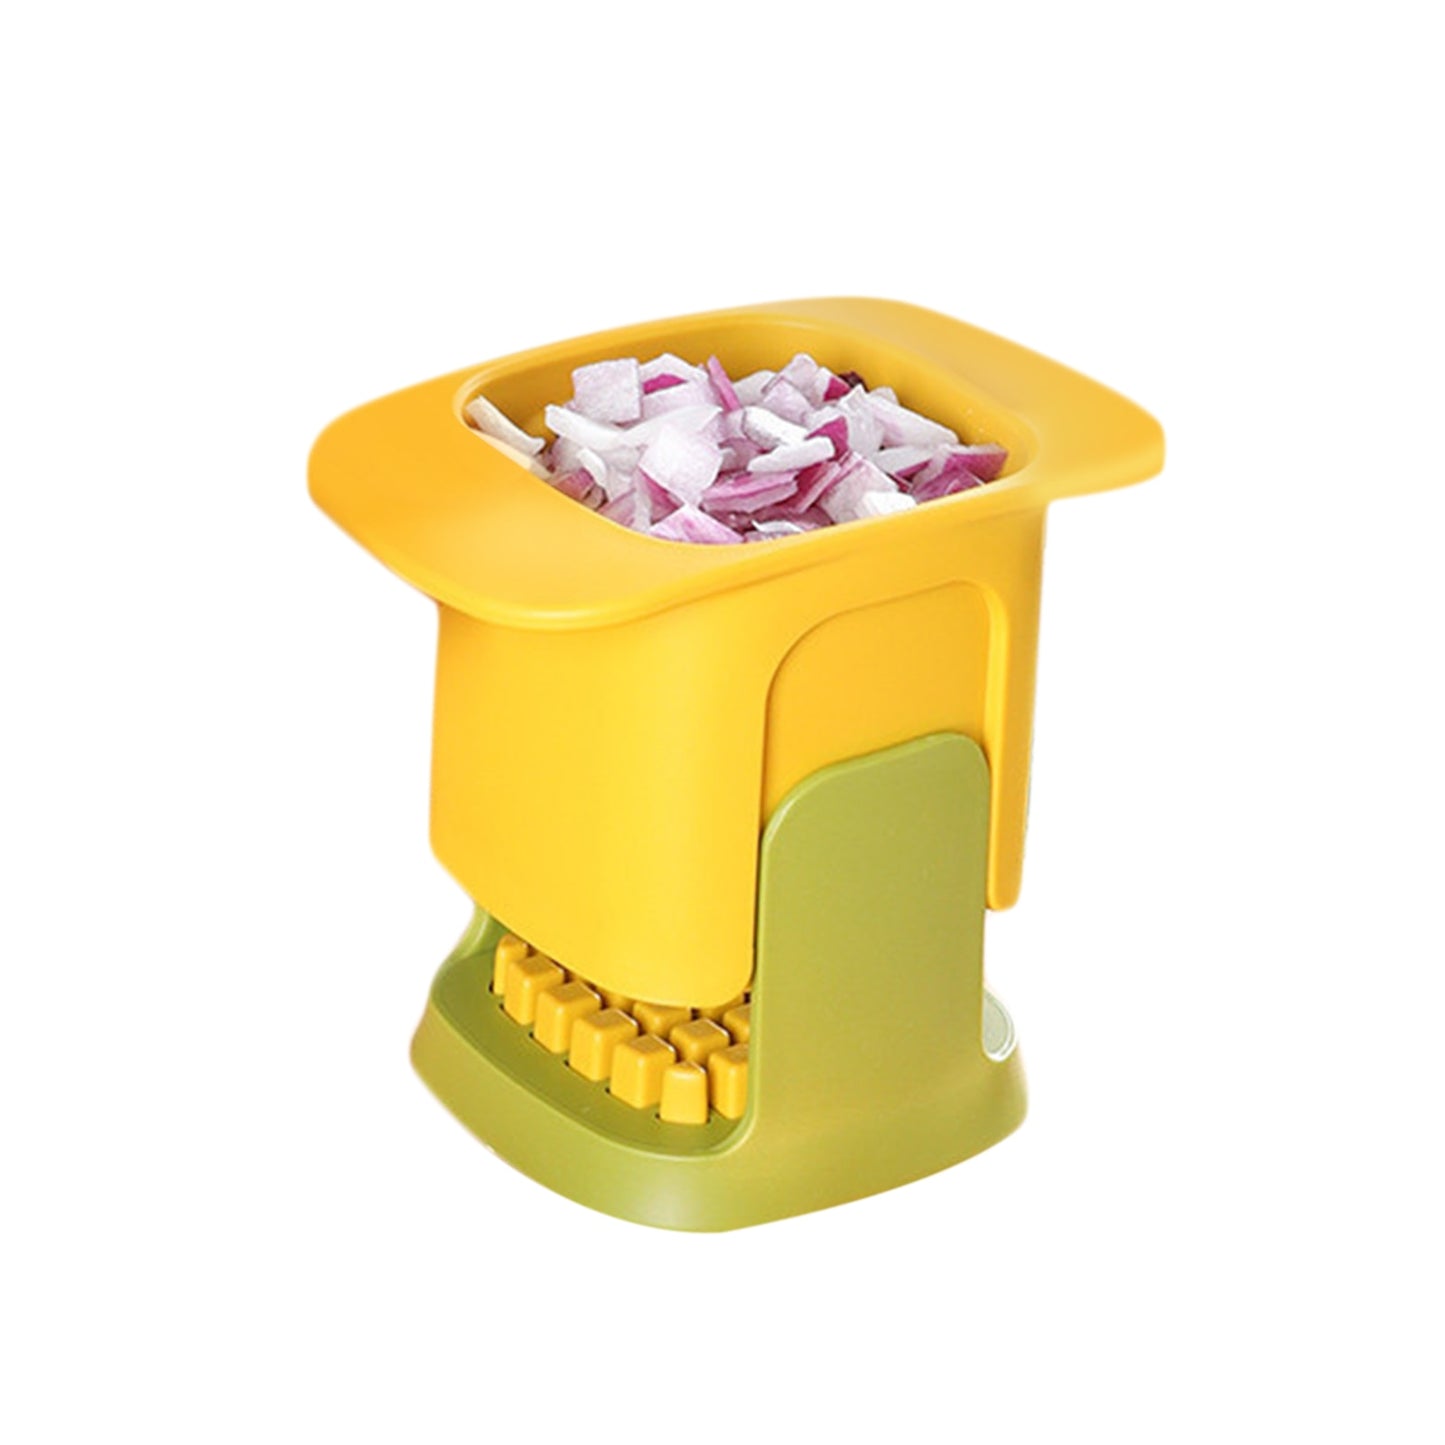 A must have vegetable dicer.